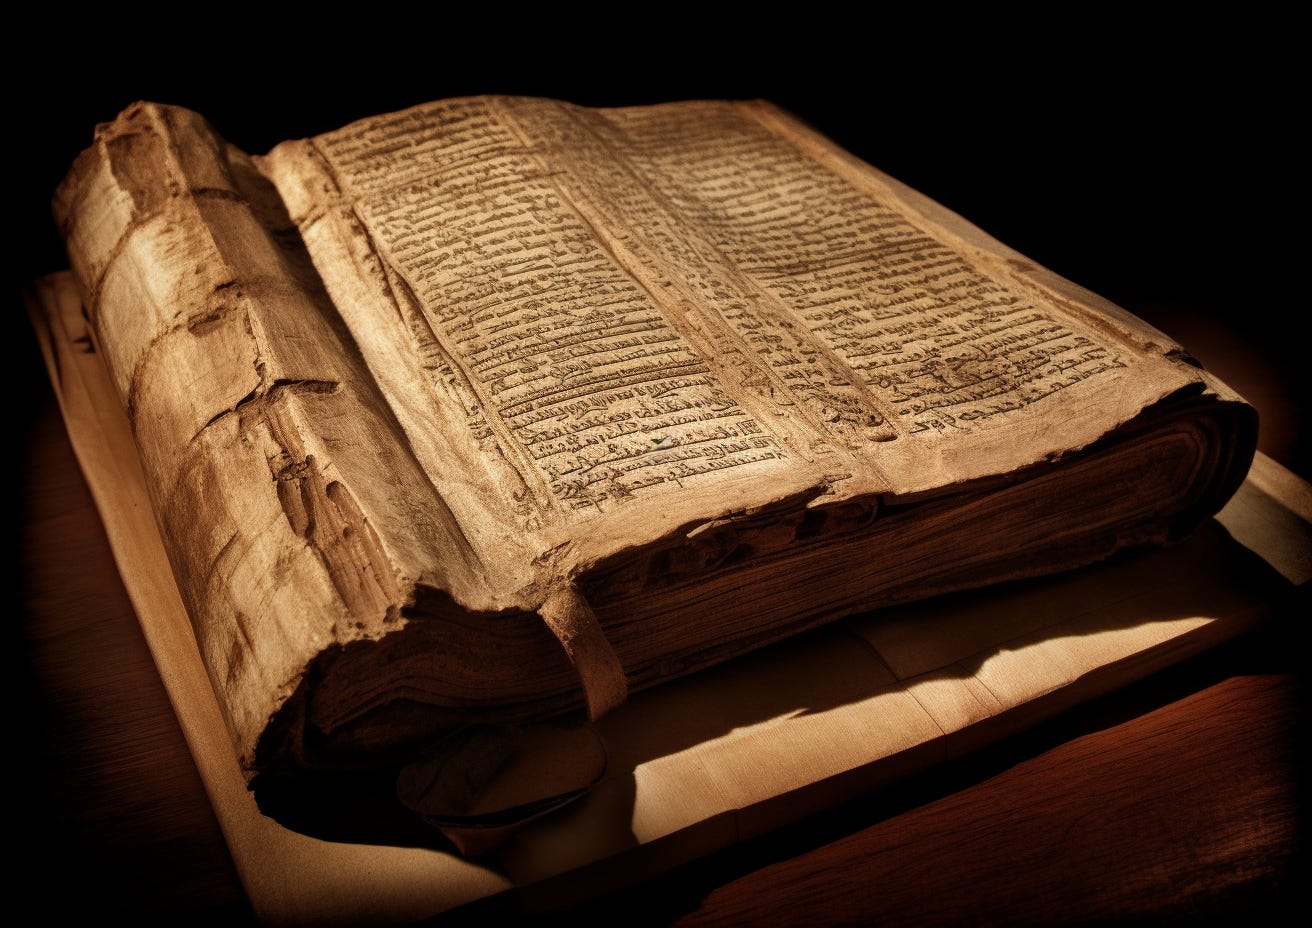 ancient book carved from wood with engraved writing